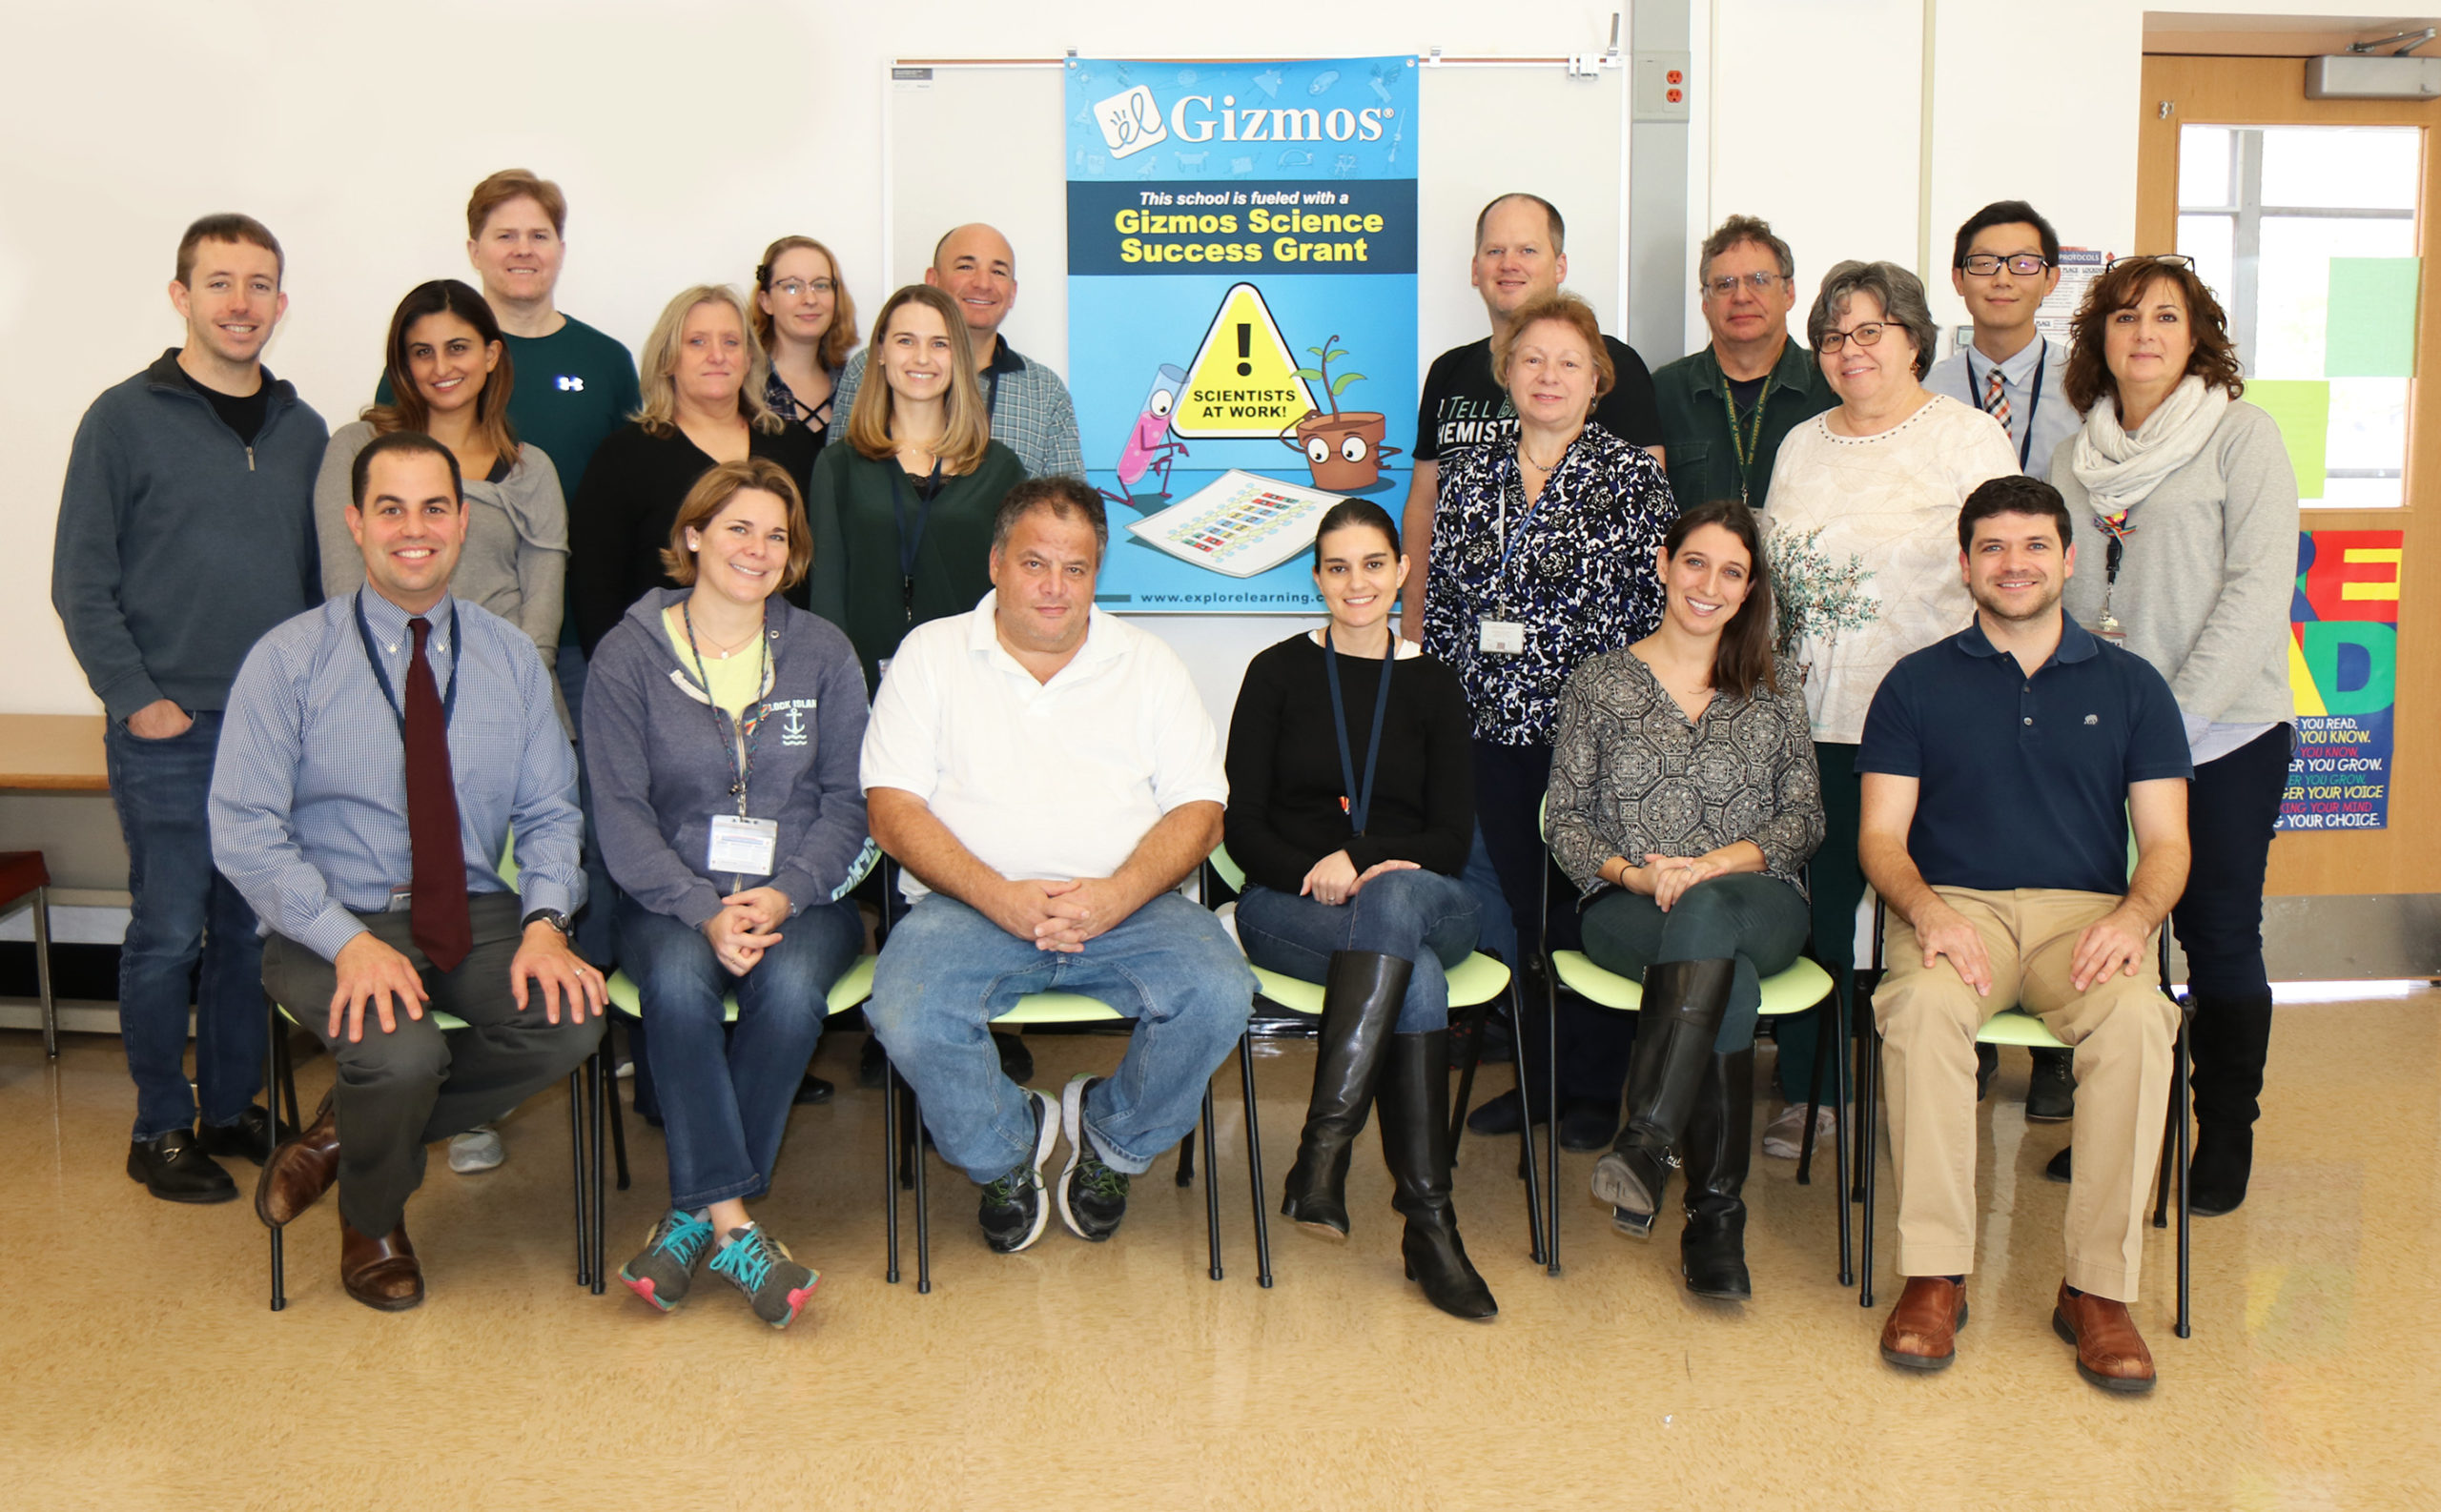 On Nov. 8, secondary science teachers from across Great Neck Public Schools attended a full day of professional development funded through the Gizmos Science Success Grant by ExploreLearning. (Photo courtesy of the Great Neck Public Schools)